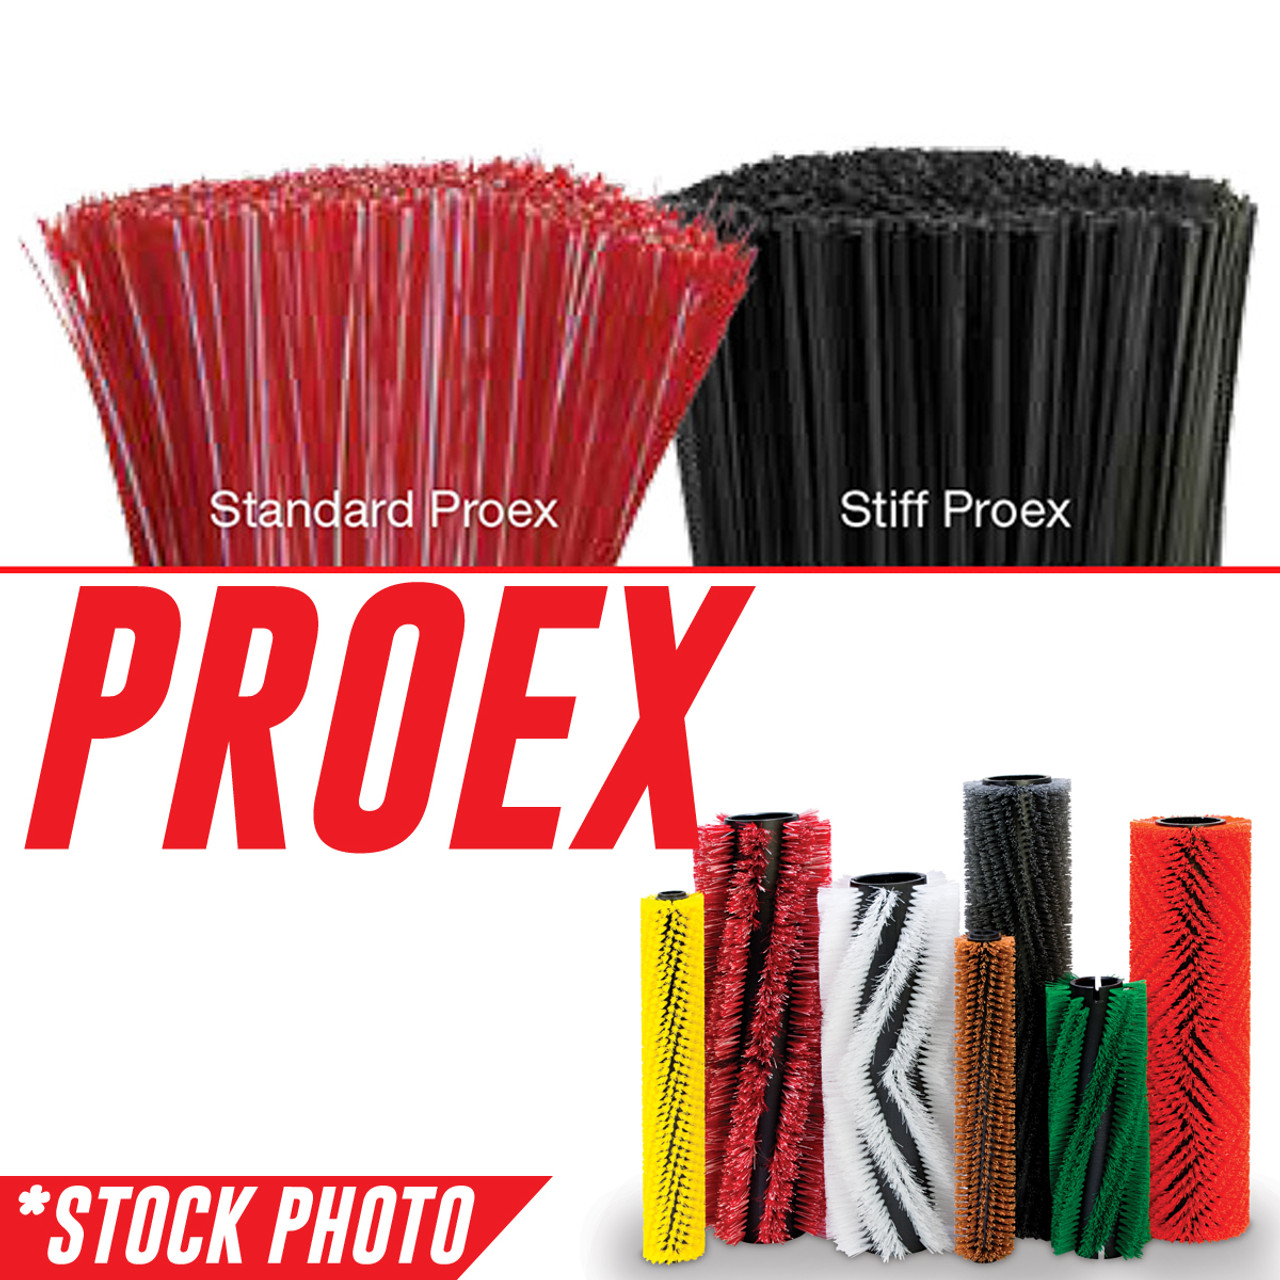 8-08-03217: 45" Cylindrical Brush 8 Double Row Proex & Wire fits American-Lincoln Models 2160, 7750, ATS46, ATS53, MPV60